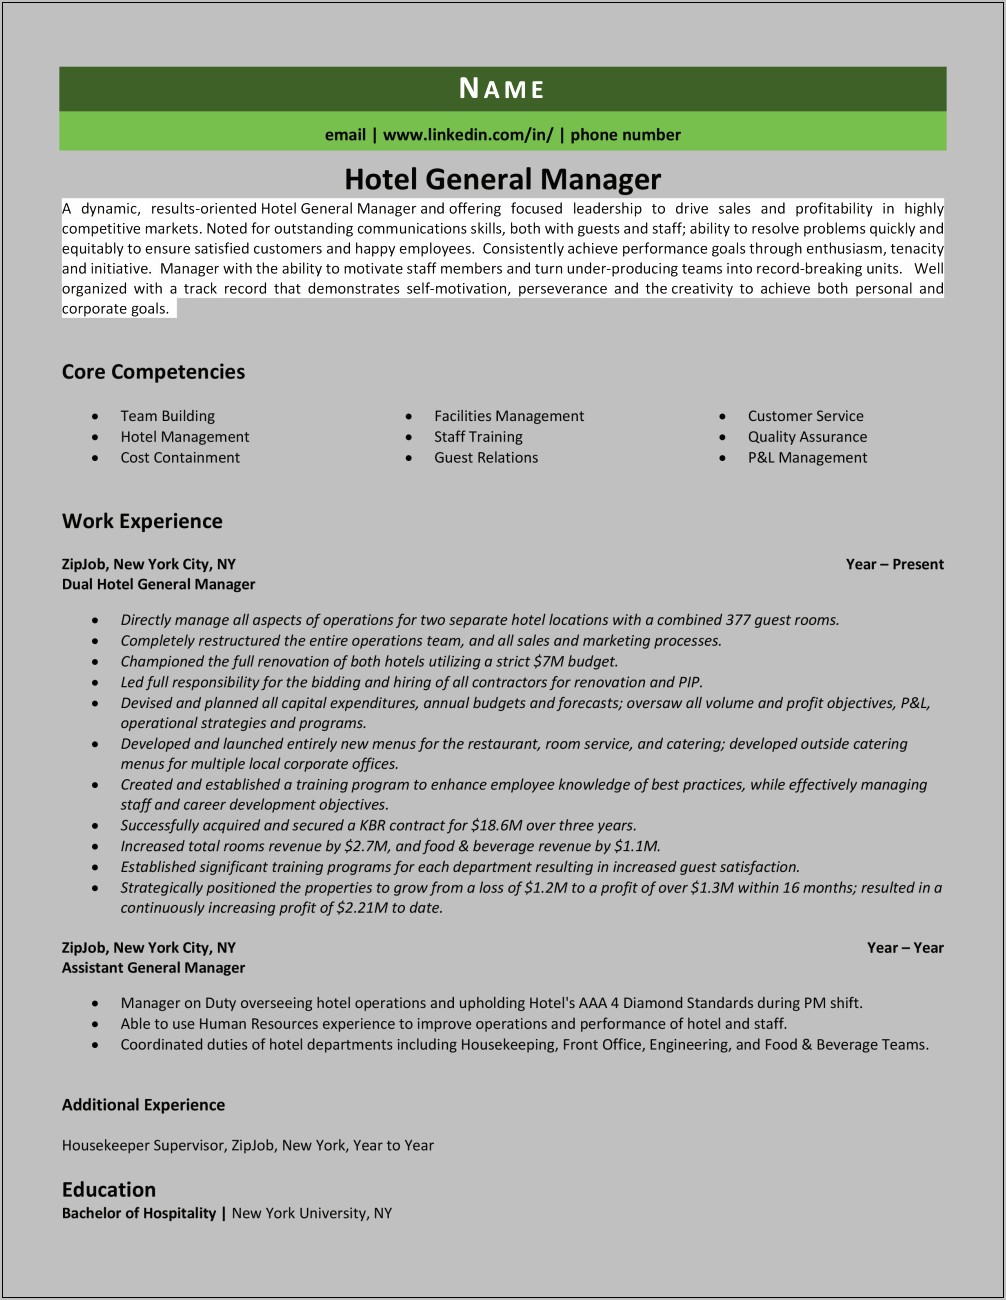 Resume For The Post Of Hotel Manager